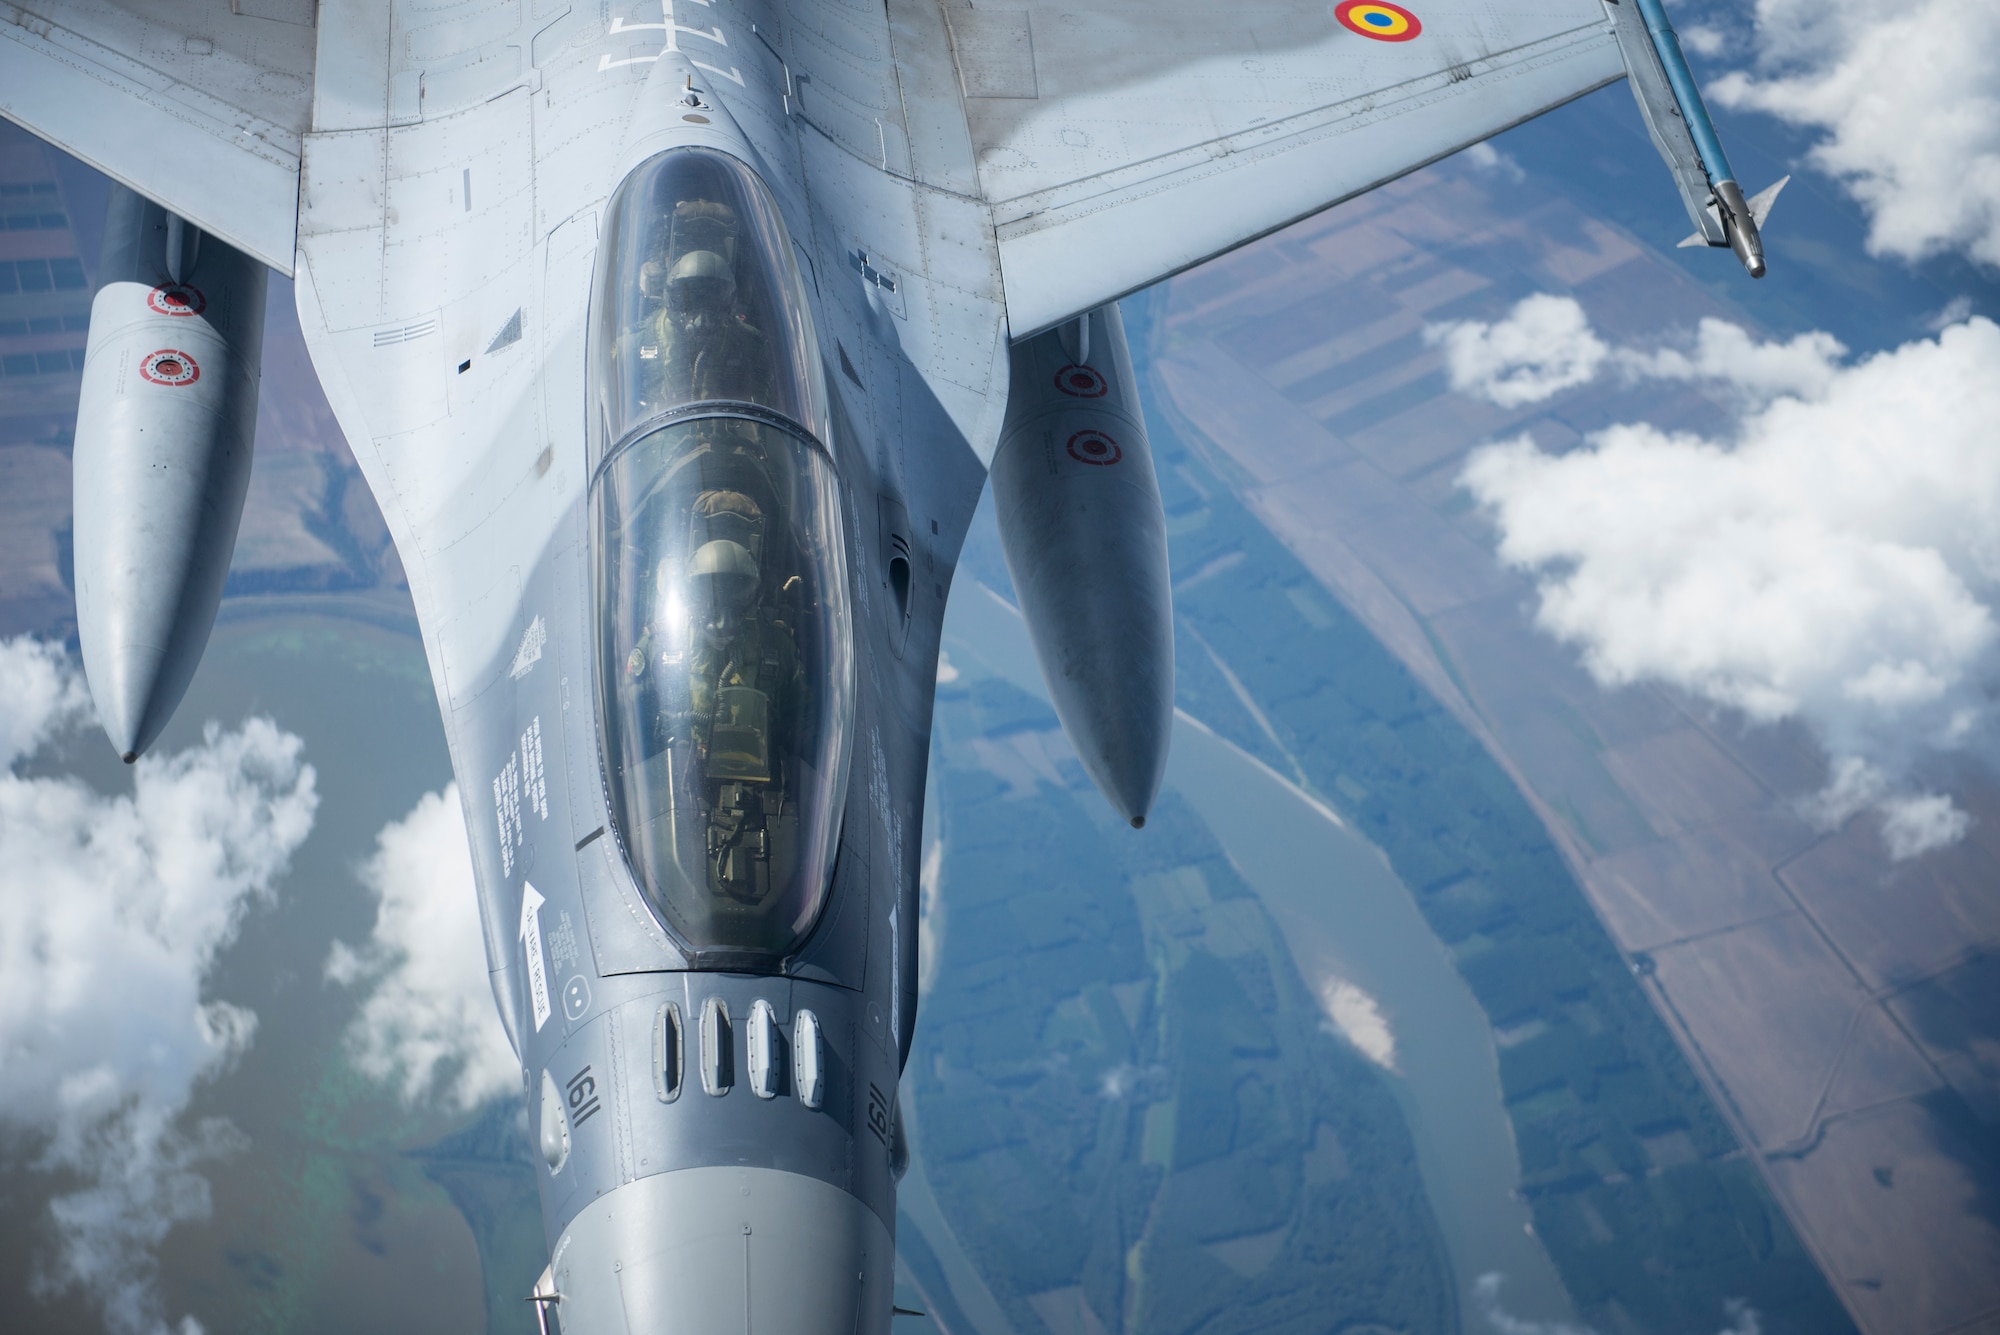 A Romanian Air Force F-16 prepares to recive fuel from a KC-135 Stratotanker from the 100th Air Refueling Wing, RAF Mildenhall, England, over Romania Sept. 13, 2018. Training with NATO allies such Romania improves interoperability and demonstrates the United States’ commitment to regional security. (U.S. Air Force photo by Tech. Sgt. Emerson Nuñez)